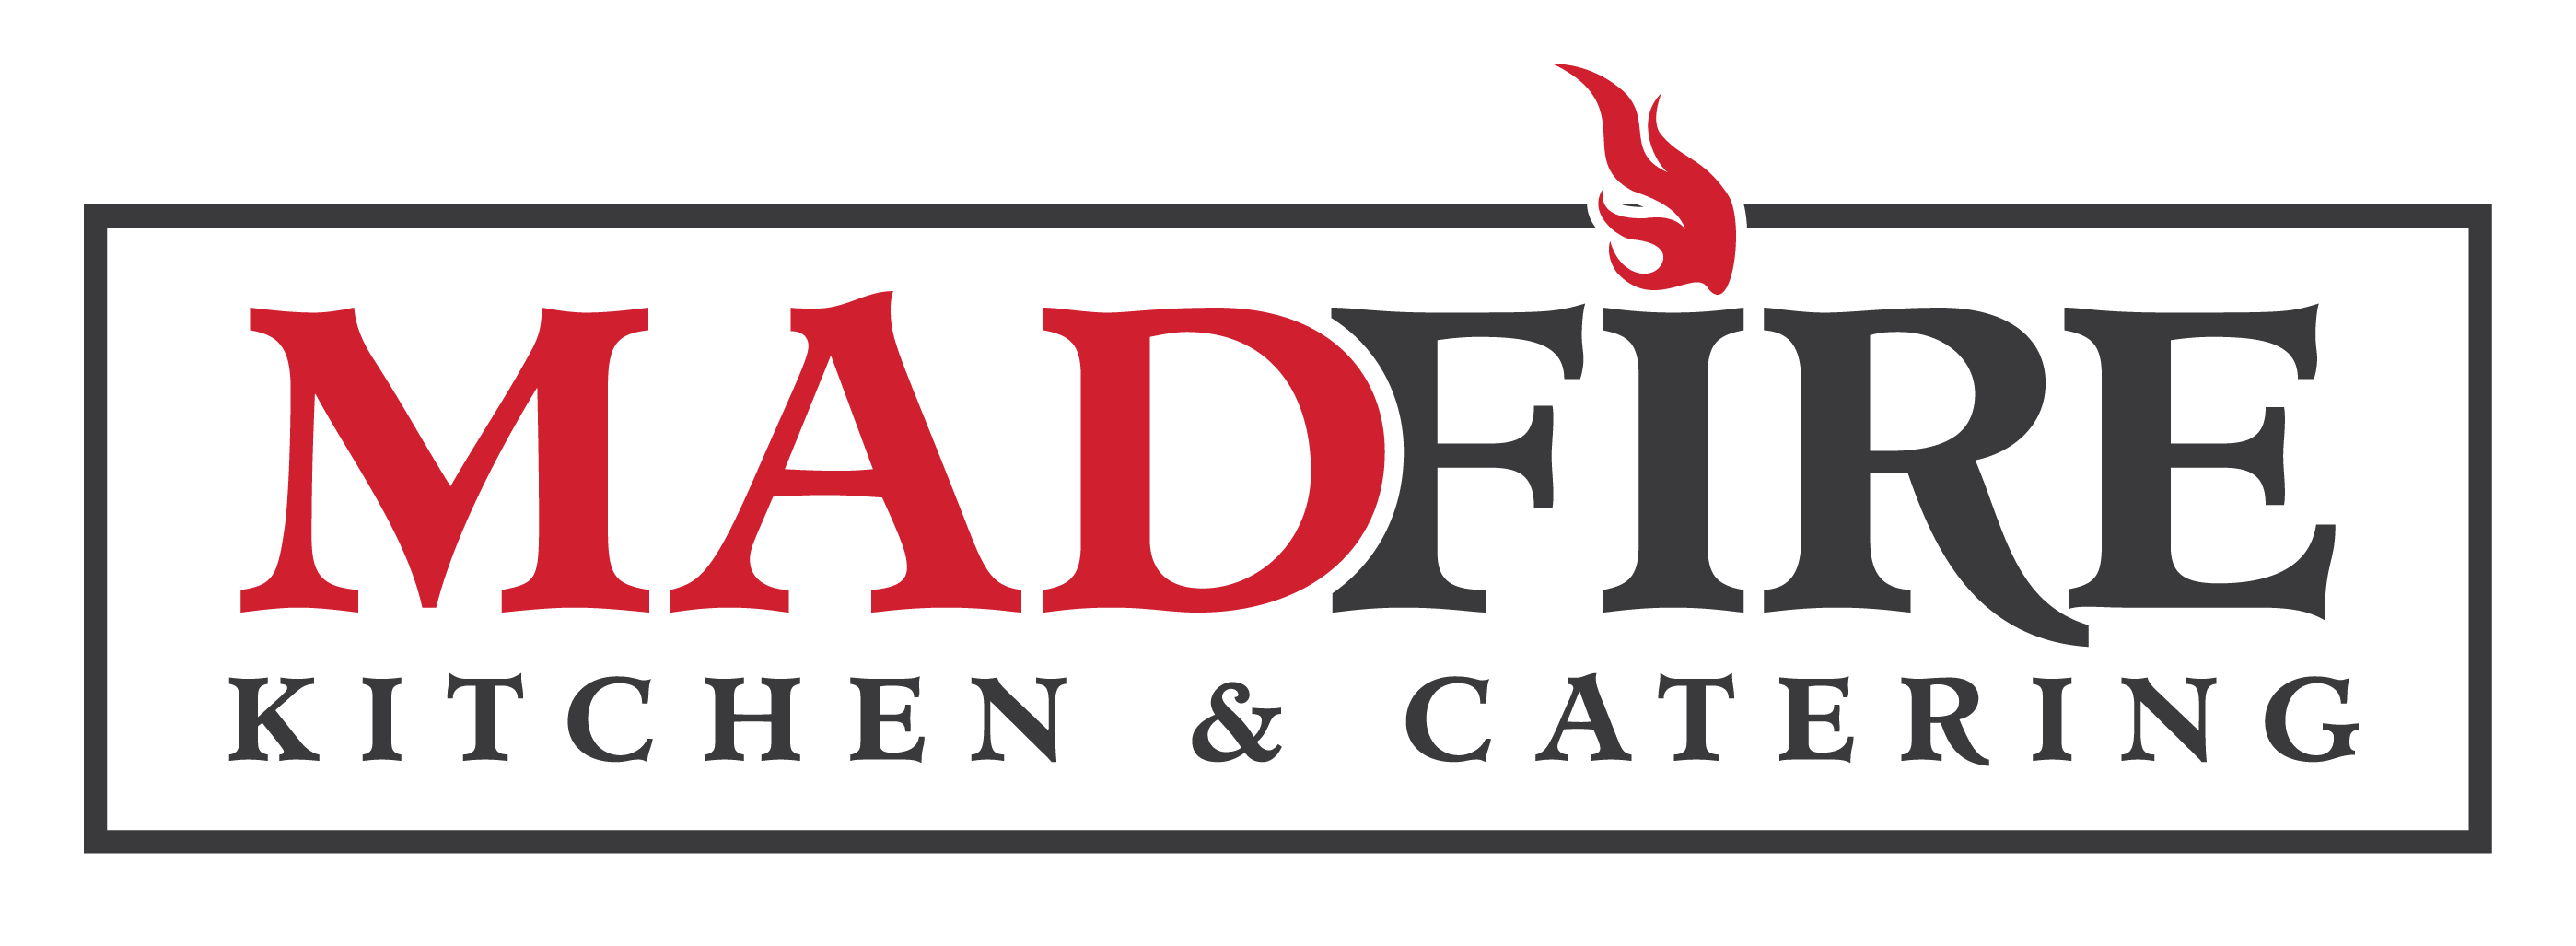 Madfire Kitchen & Catering logo